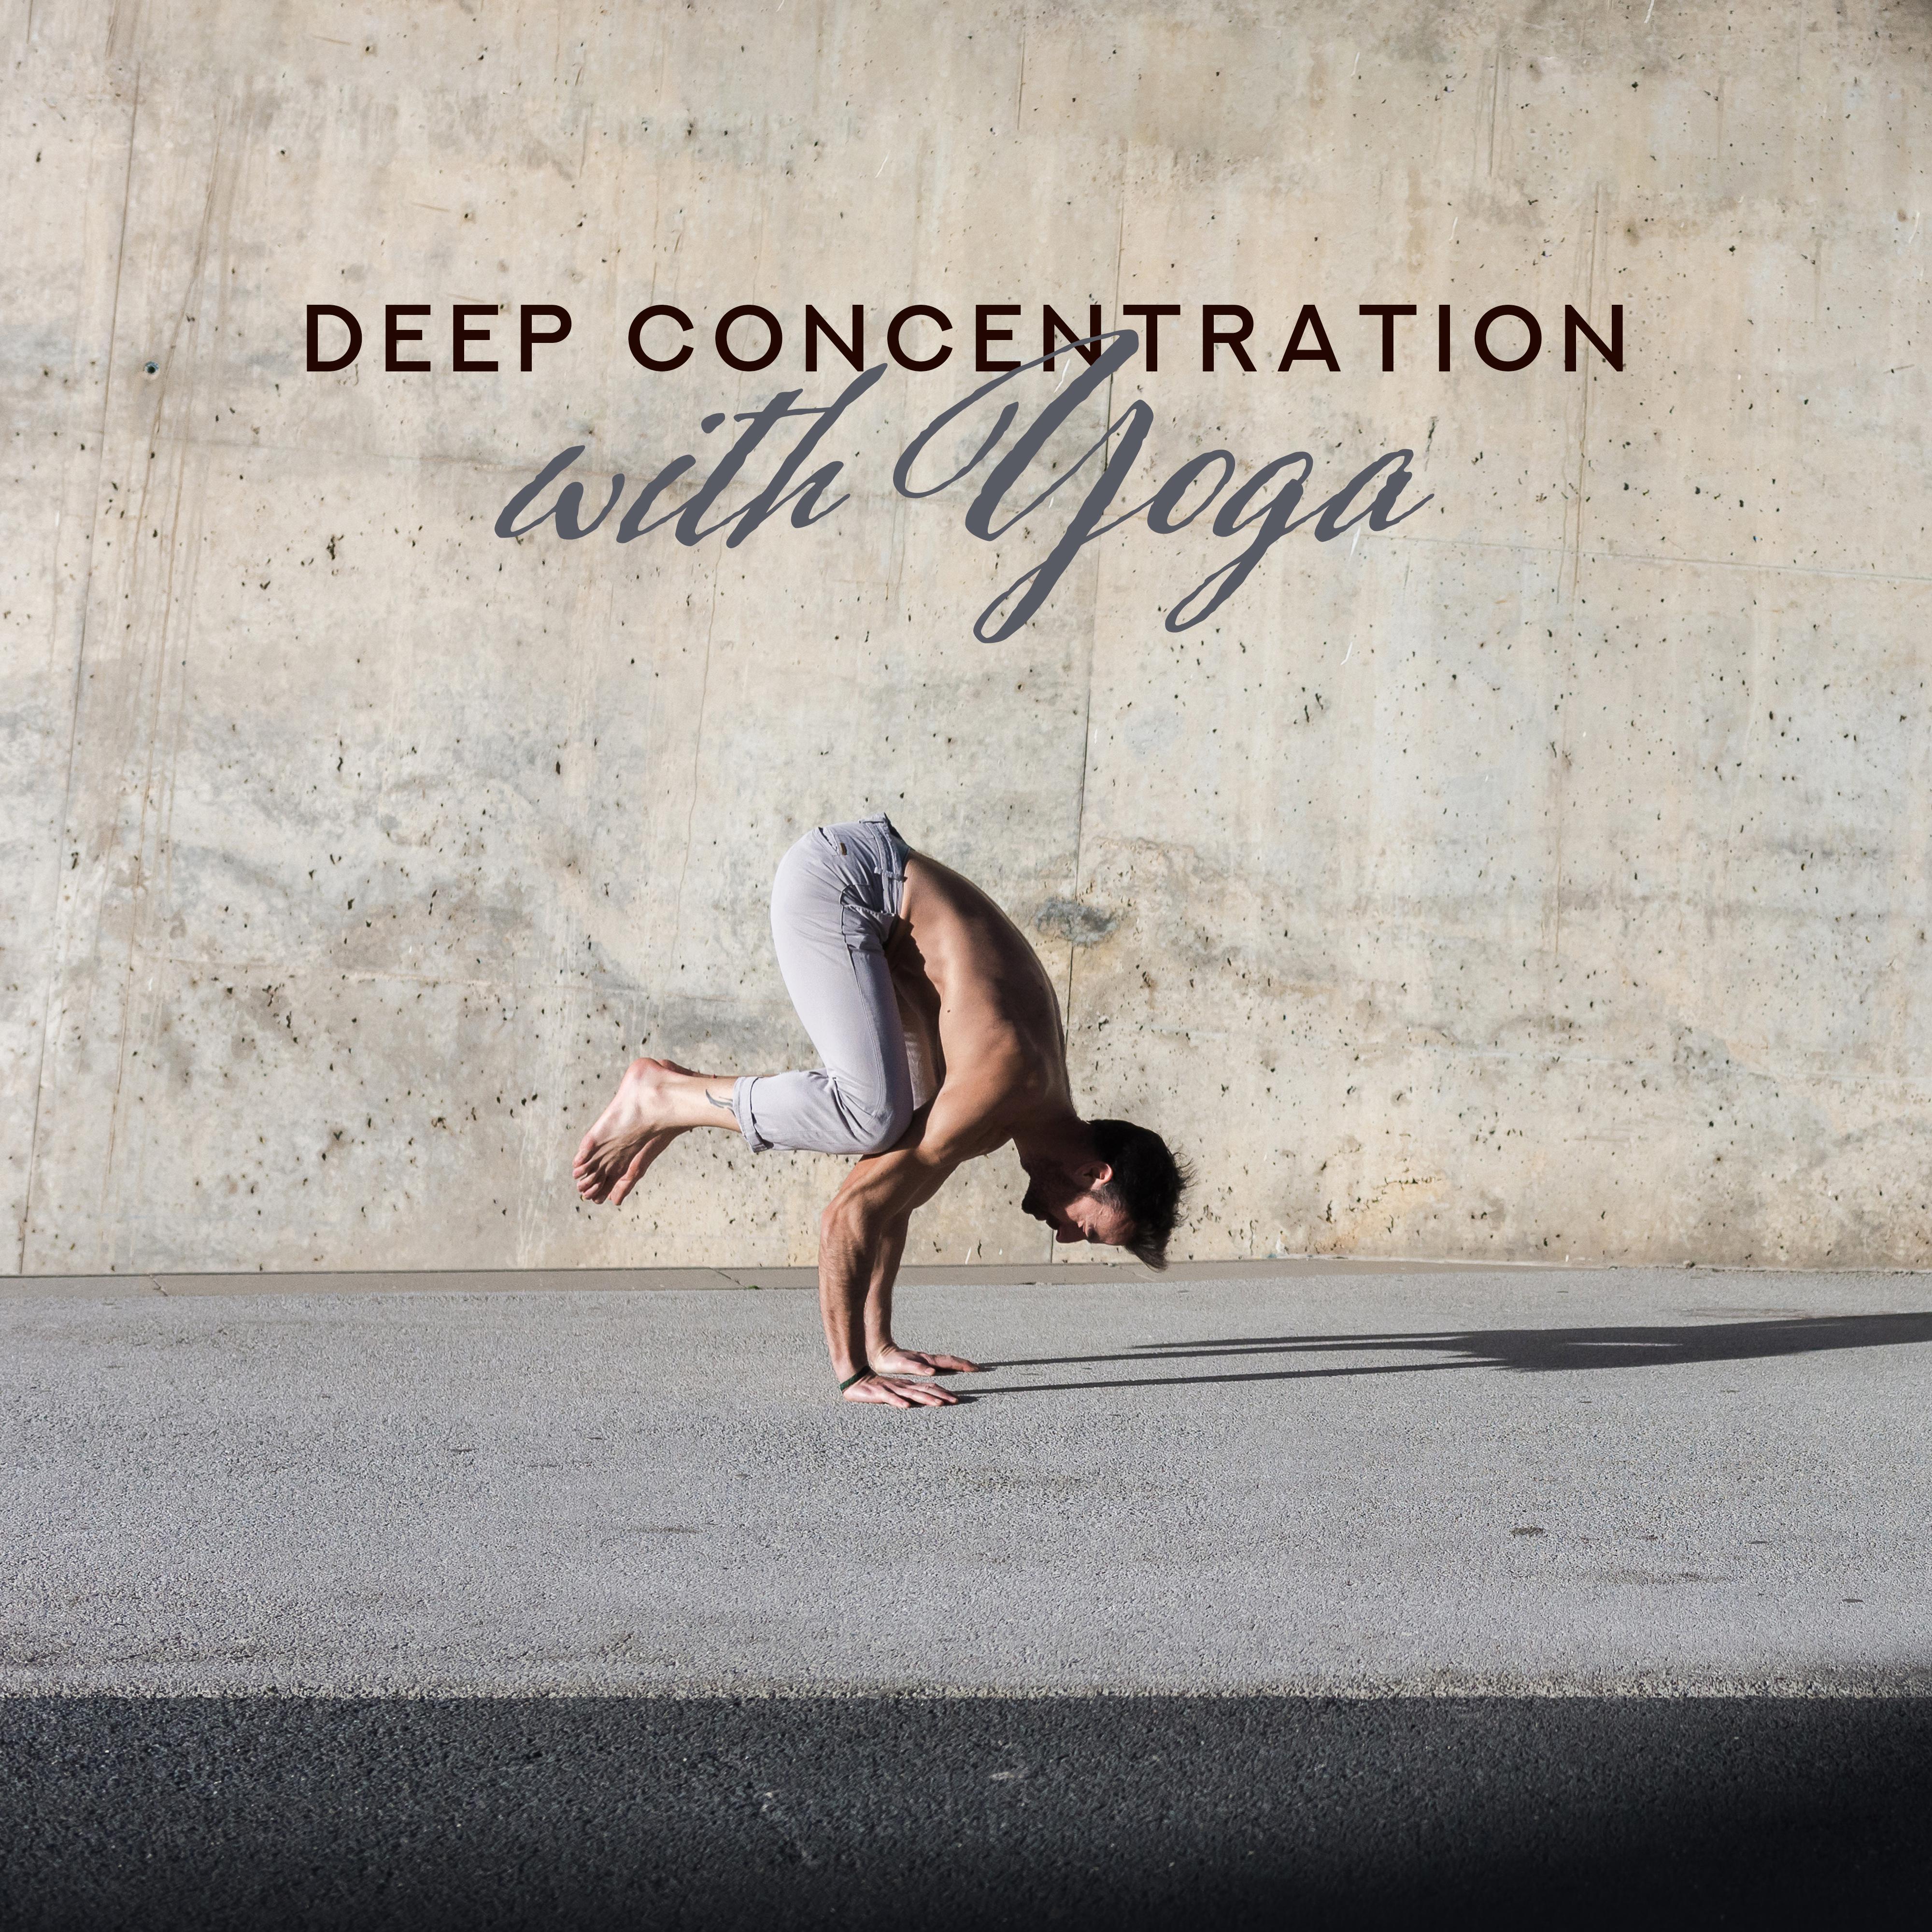 Deep Concentration with Yoga  Meditation Music for Relaxation, Inner Balance, Yoga Relaxing Mix, Zen, Lounge Music, Mindfulness Therapy, Music Zone